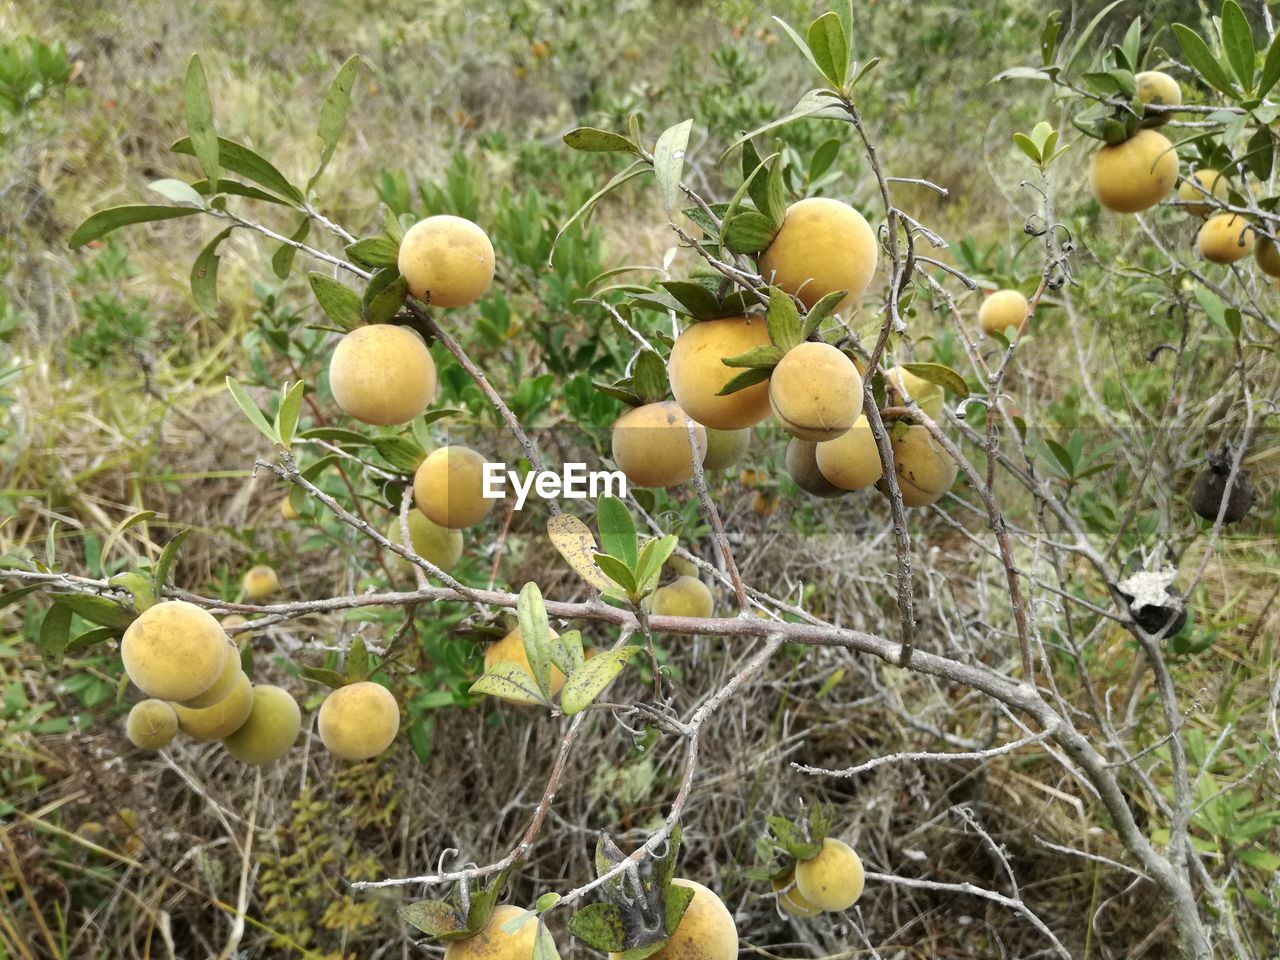 FRUITS GROWING ON TREE